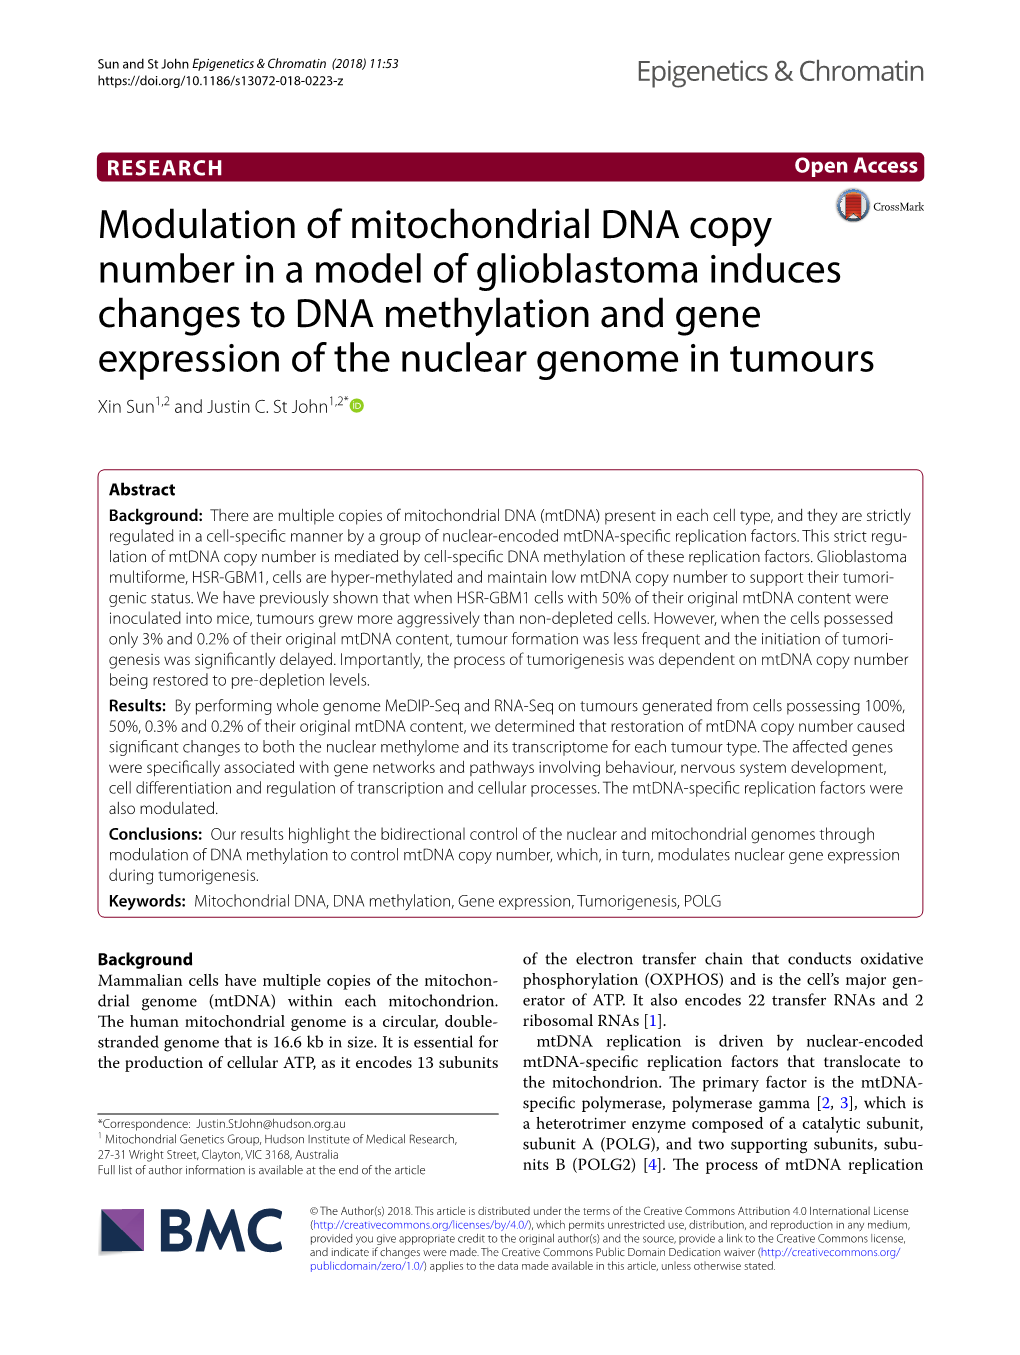 Modulation of Mitochondrial DNA Copy Number in a Model of Glioblastoma